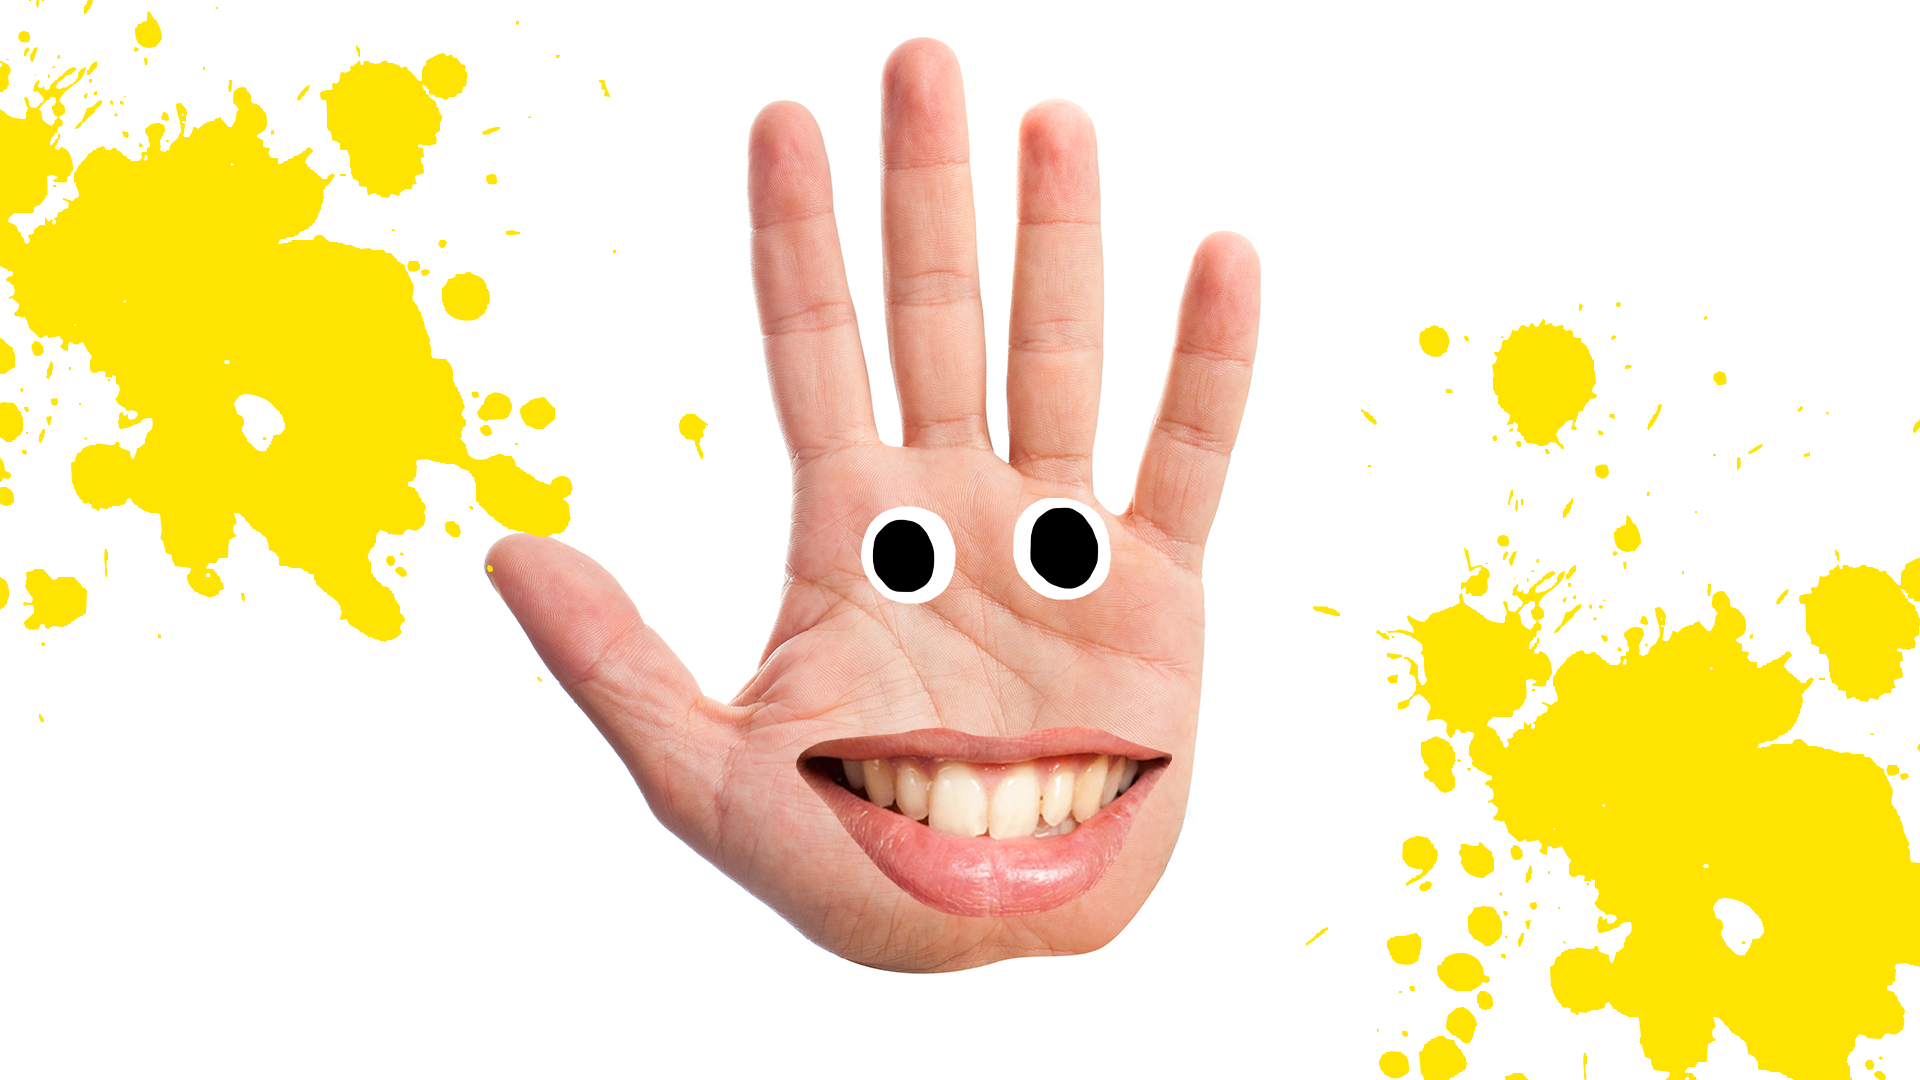 Hand with goofy face and splats